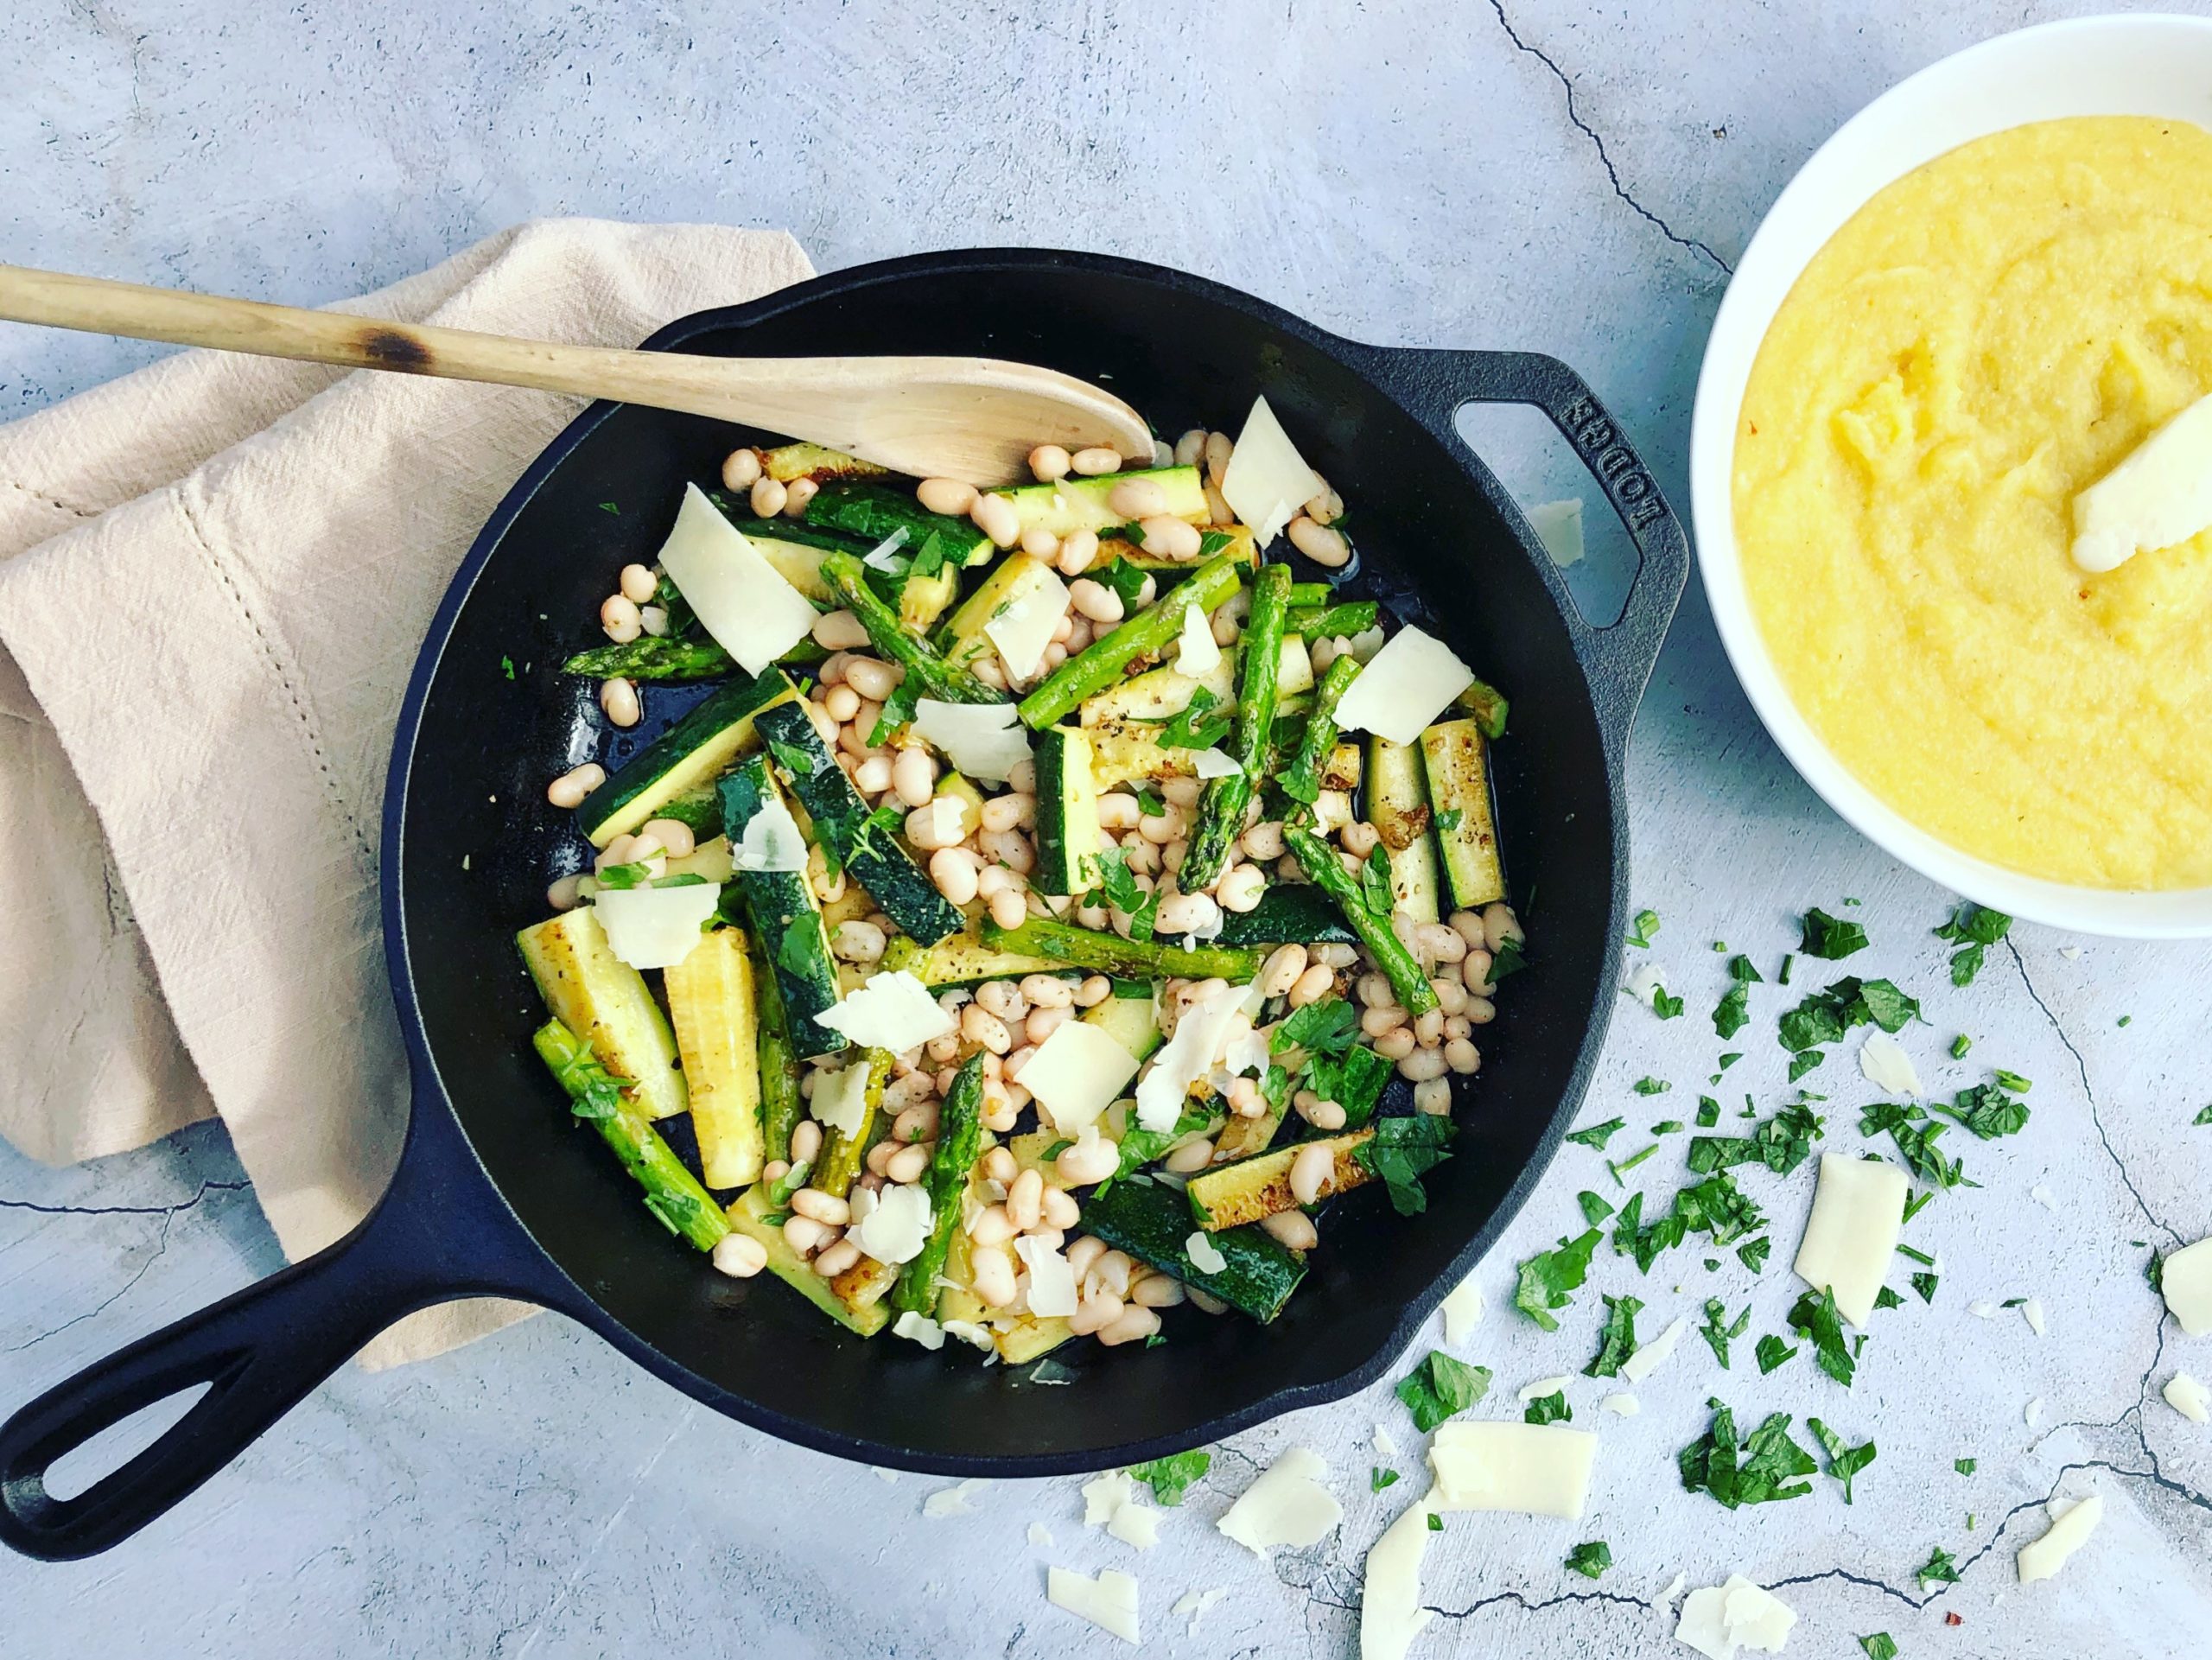 Creamy Polenta with Zucchini, Asparagus and Navy Beans.